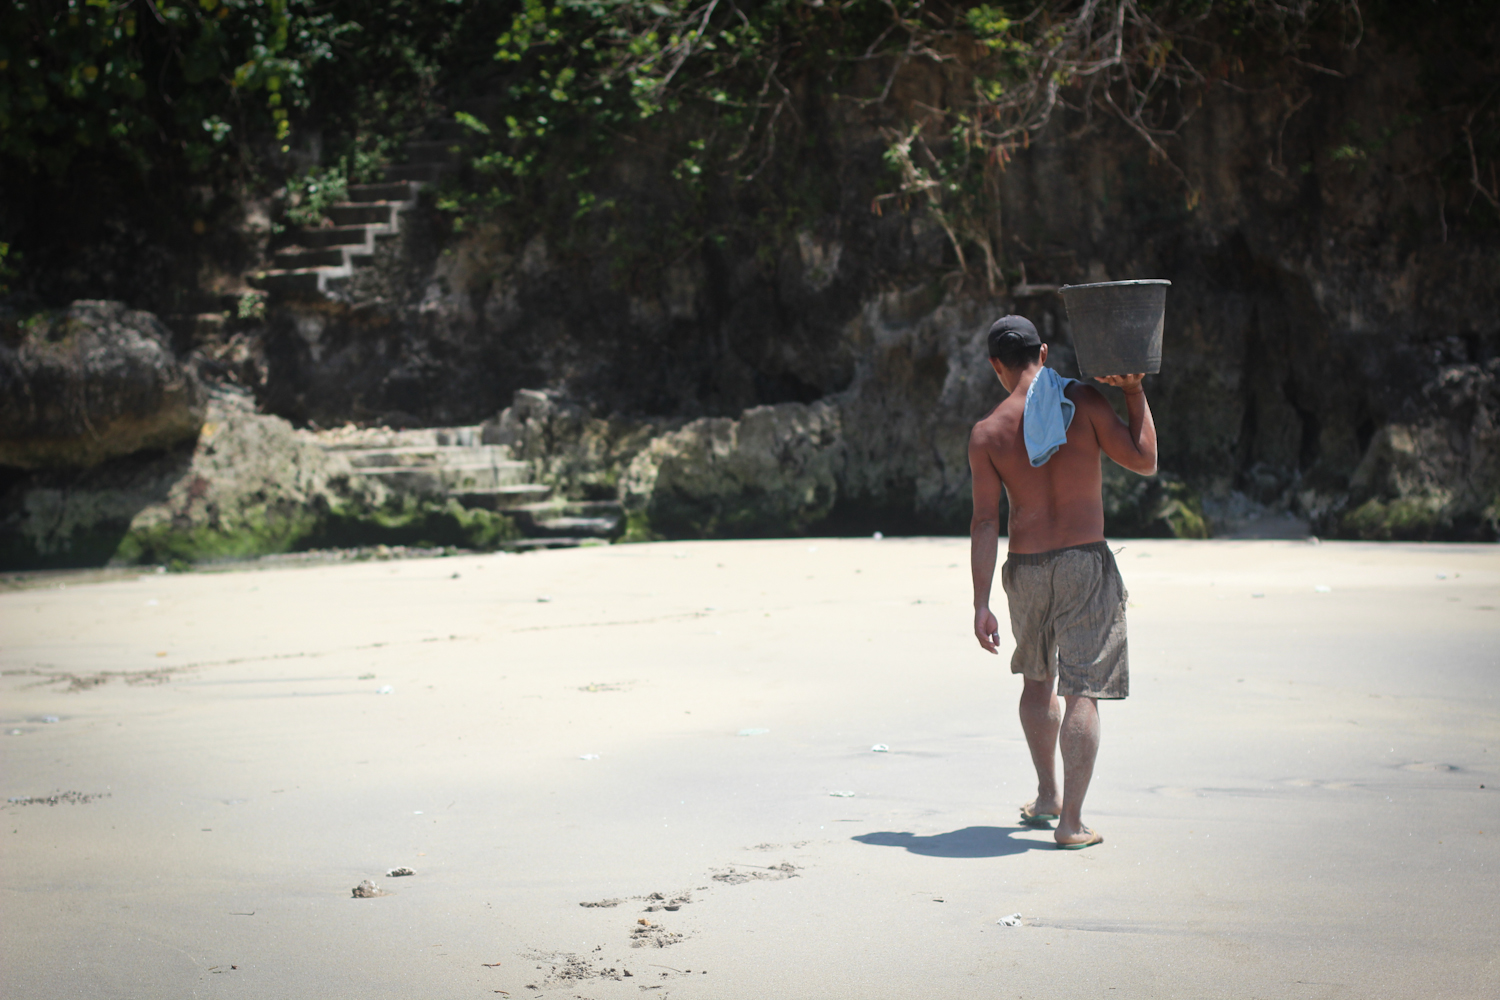 Made’s “secret beach”: On Nusa Penida, travel, and the delight of discovery.